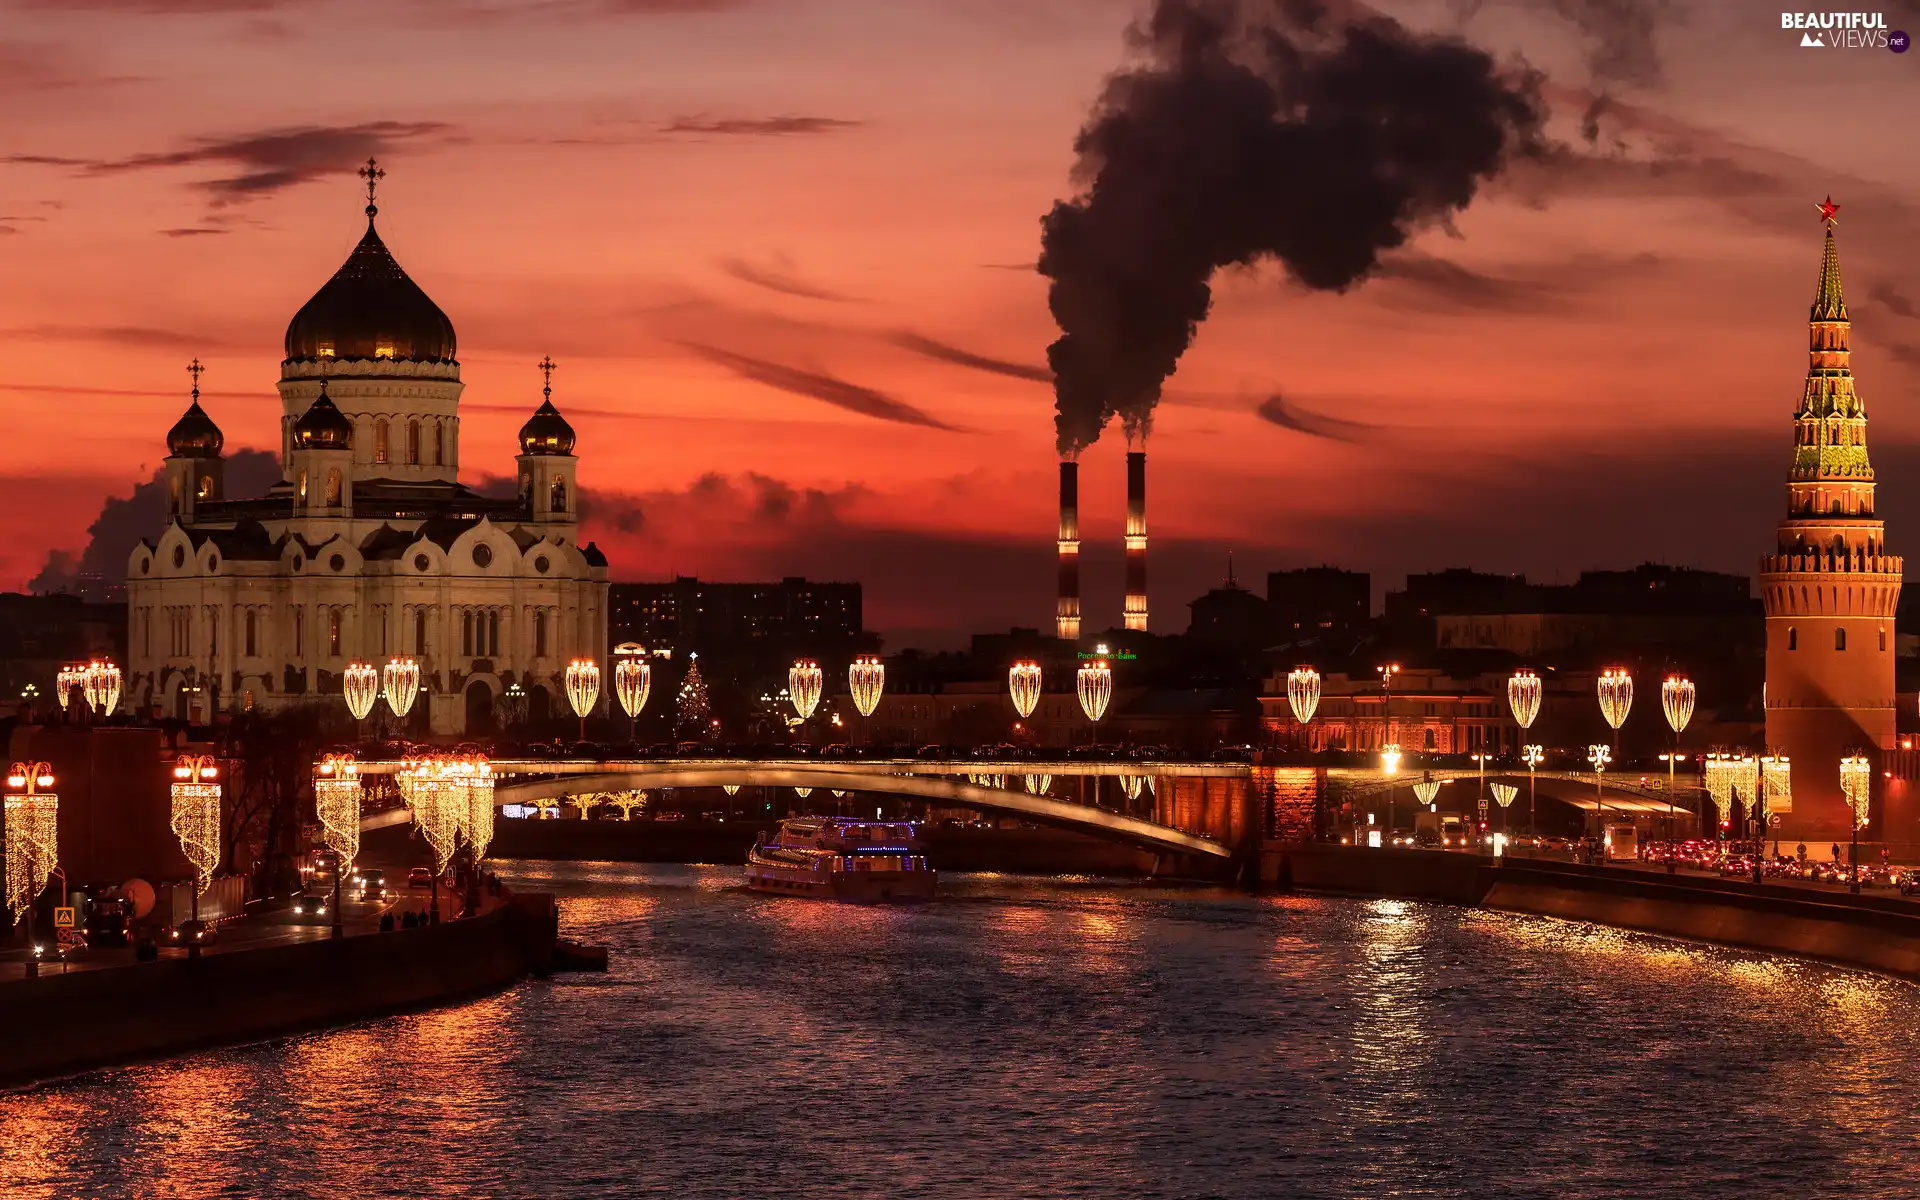 tower, Chimneys, Moscow, bridge, Russia, lighting, Ship, ornamental, Cerkiew, Moscow River, smoke, Great Sunsets, Cathedral of Christ the Savior